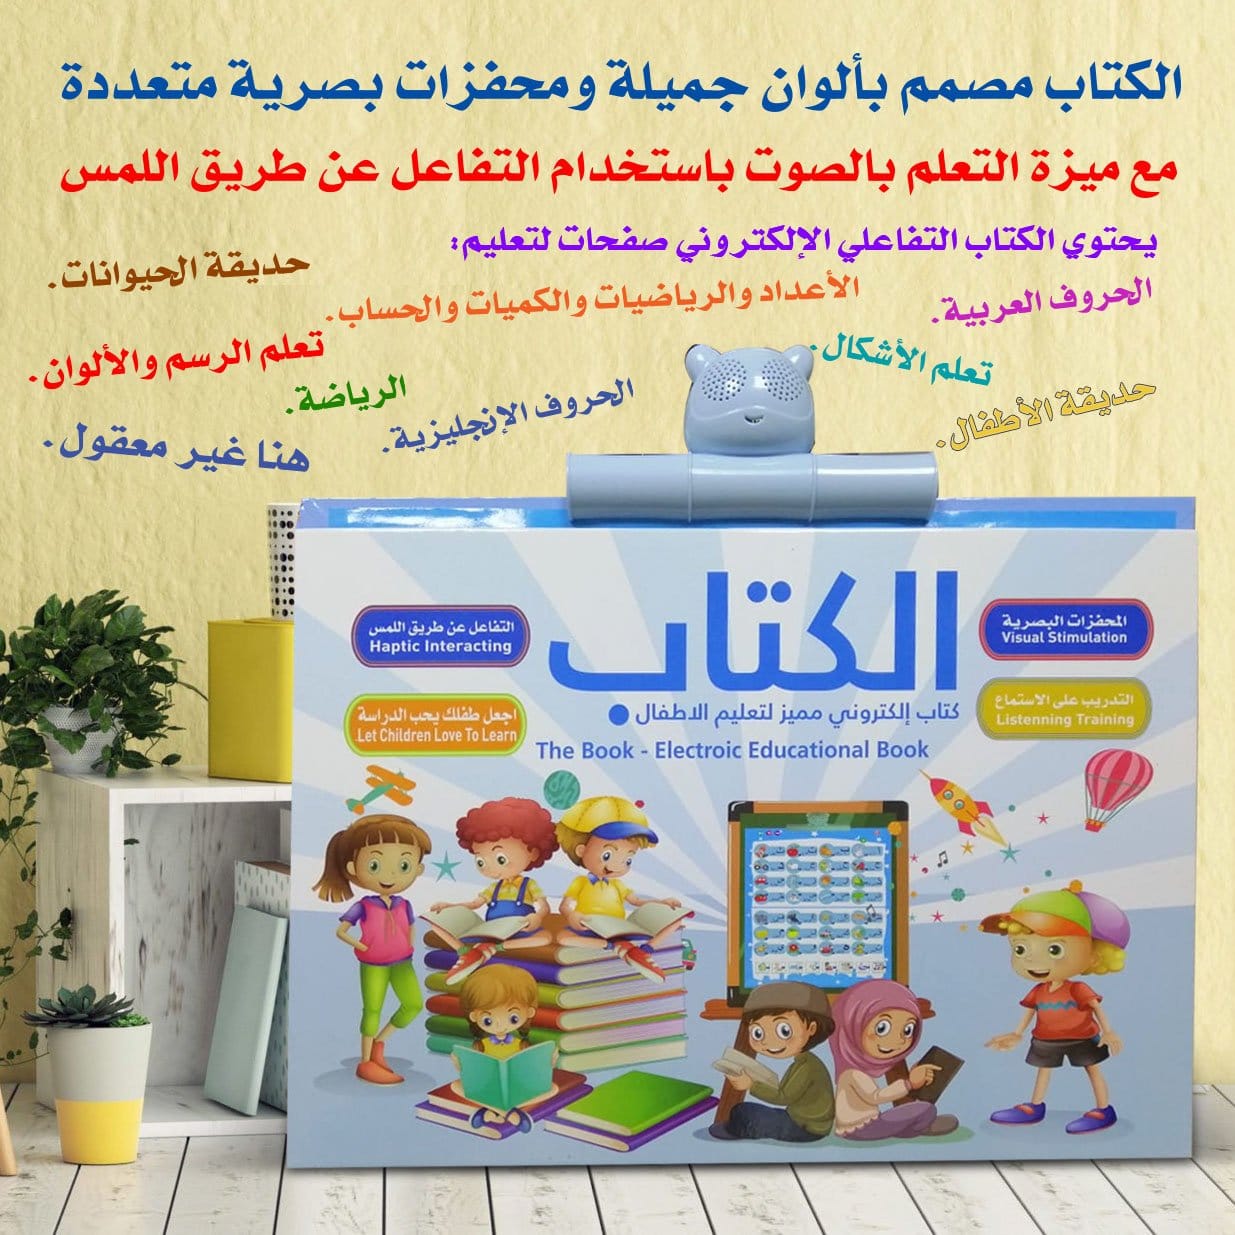 The distinguished book in Arabic and English